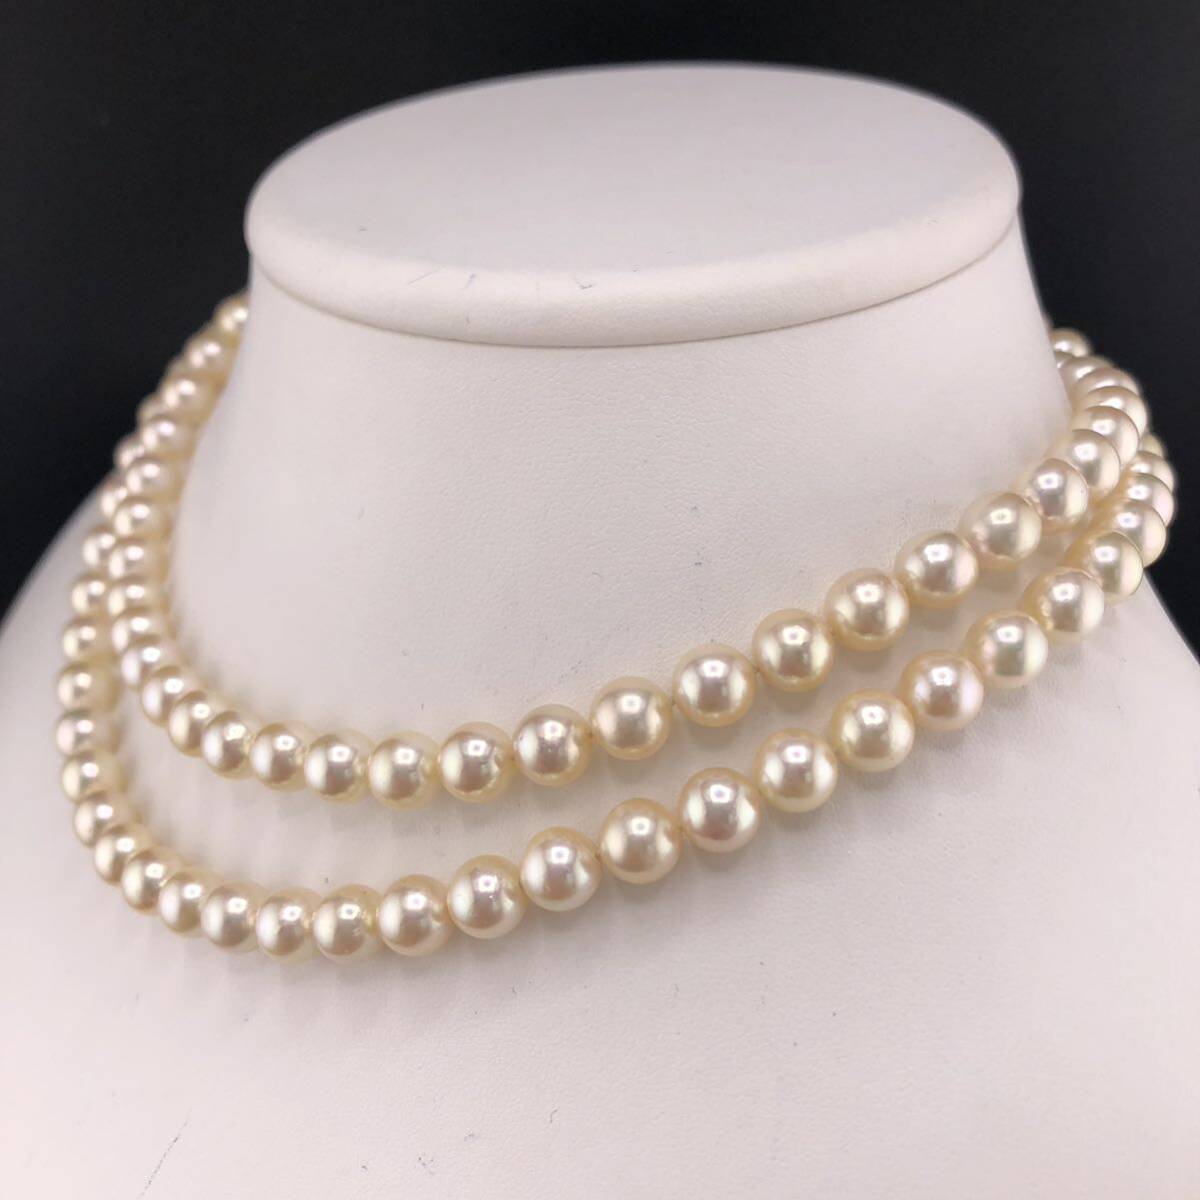 E03-1172 ロングパールネックレス 7.5mm~8.0mm 82cm 69g ( ロング Pearl necklace SILVER accessory )_画像2